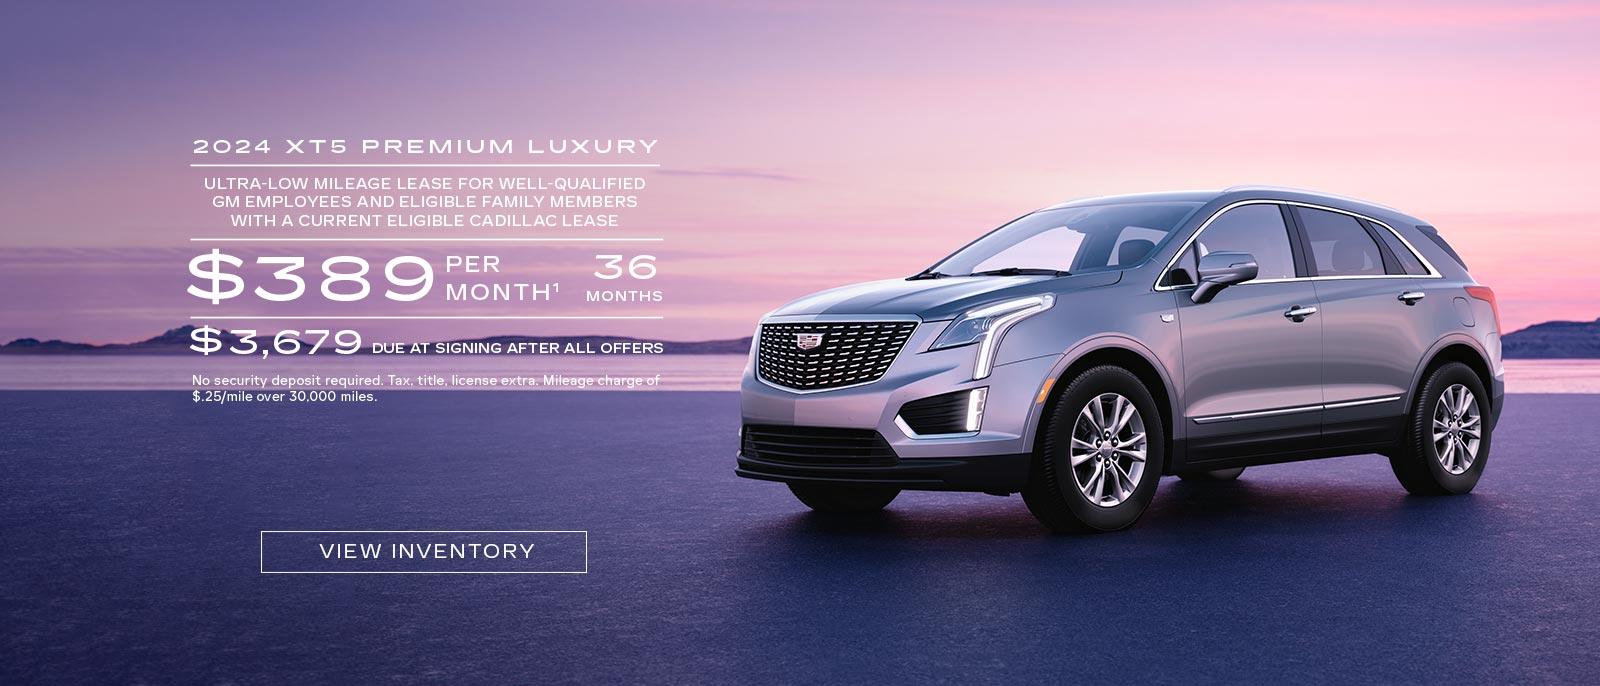 2024 XT5 Premium Luxury. Ultra-low mileage lease forfor well-qualified current eligible GM employees and eligible family members with a current eligible Cadillac lease. $389 per month. 36 months. $3,679 due at signing after all offers.